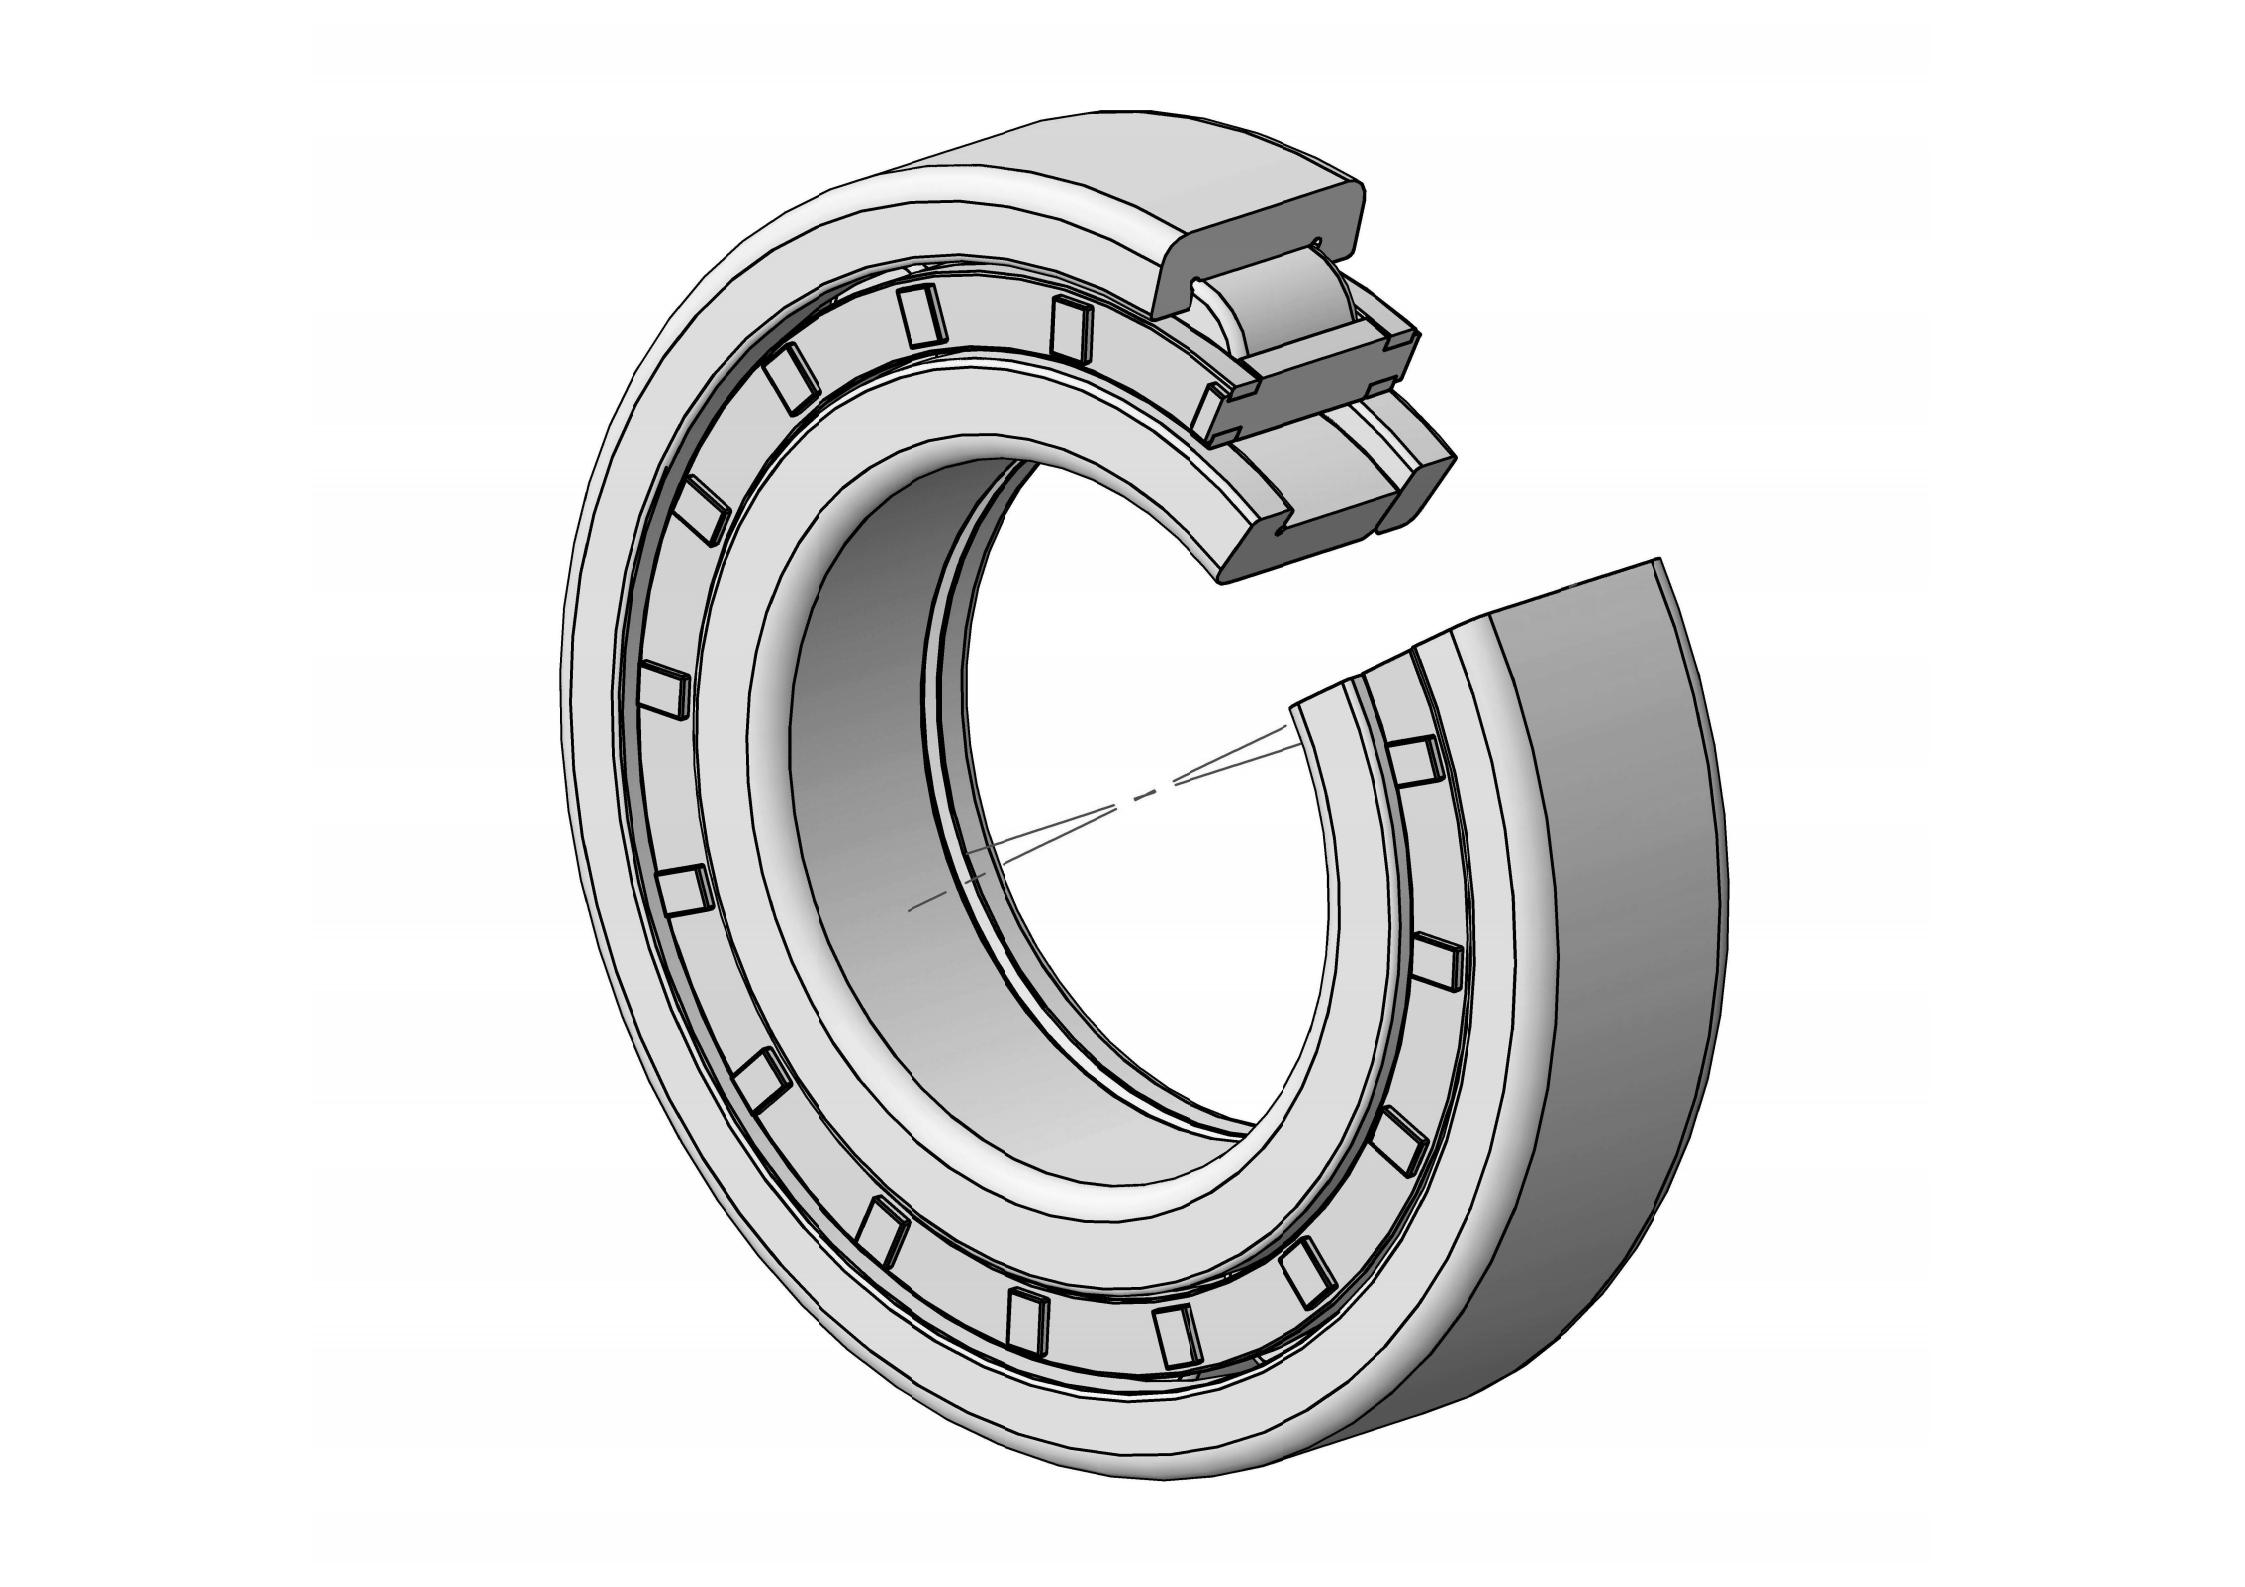 NUP311-E Single Row Cylindrical roller bearing 